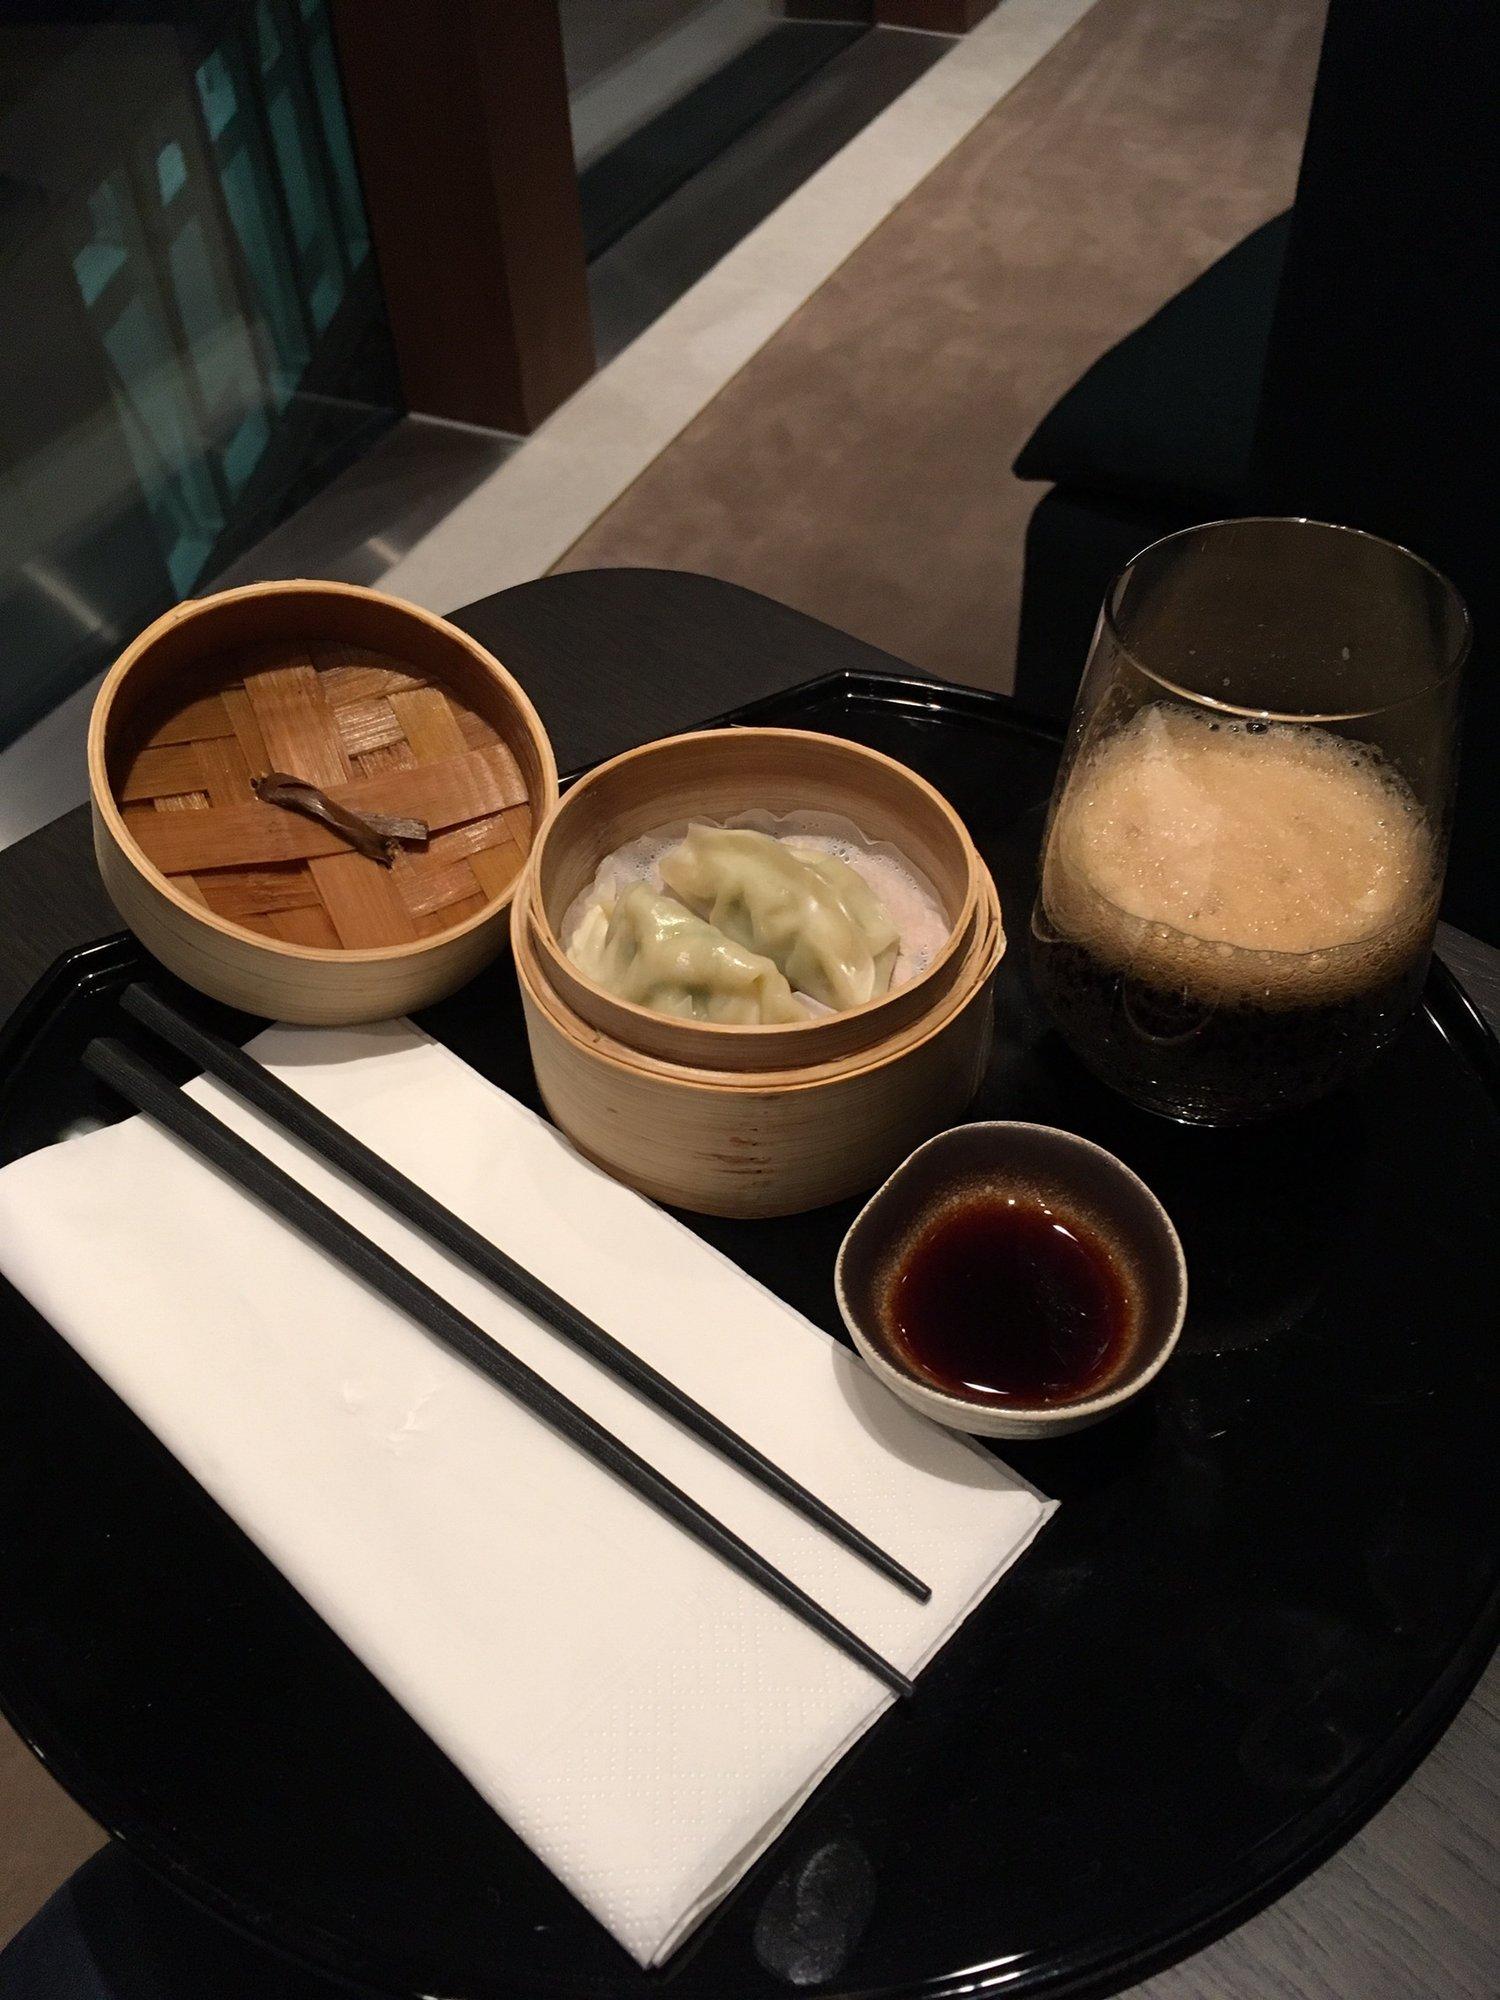 Cathay Pacific Business Class Lounge image 23 of 48